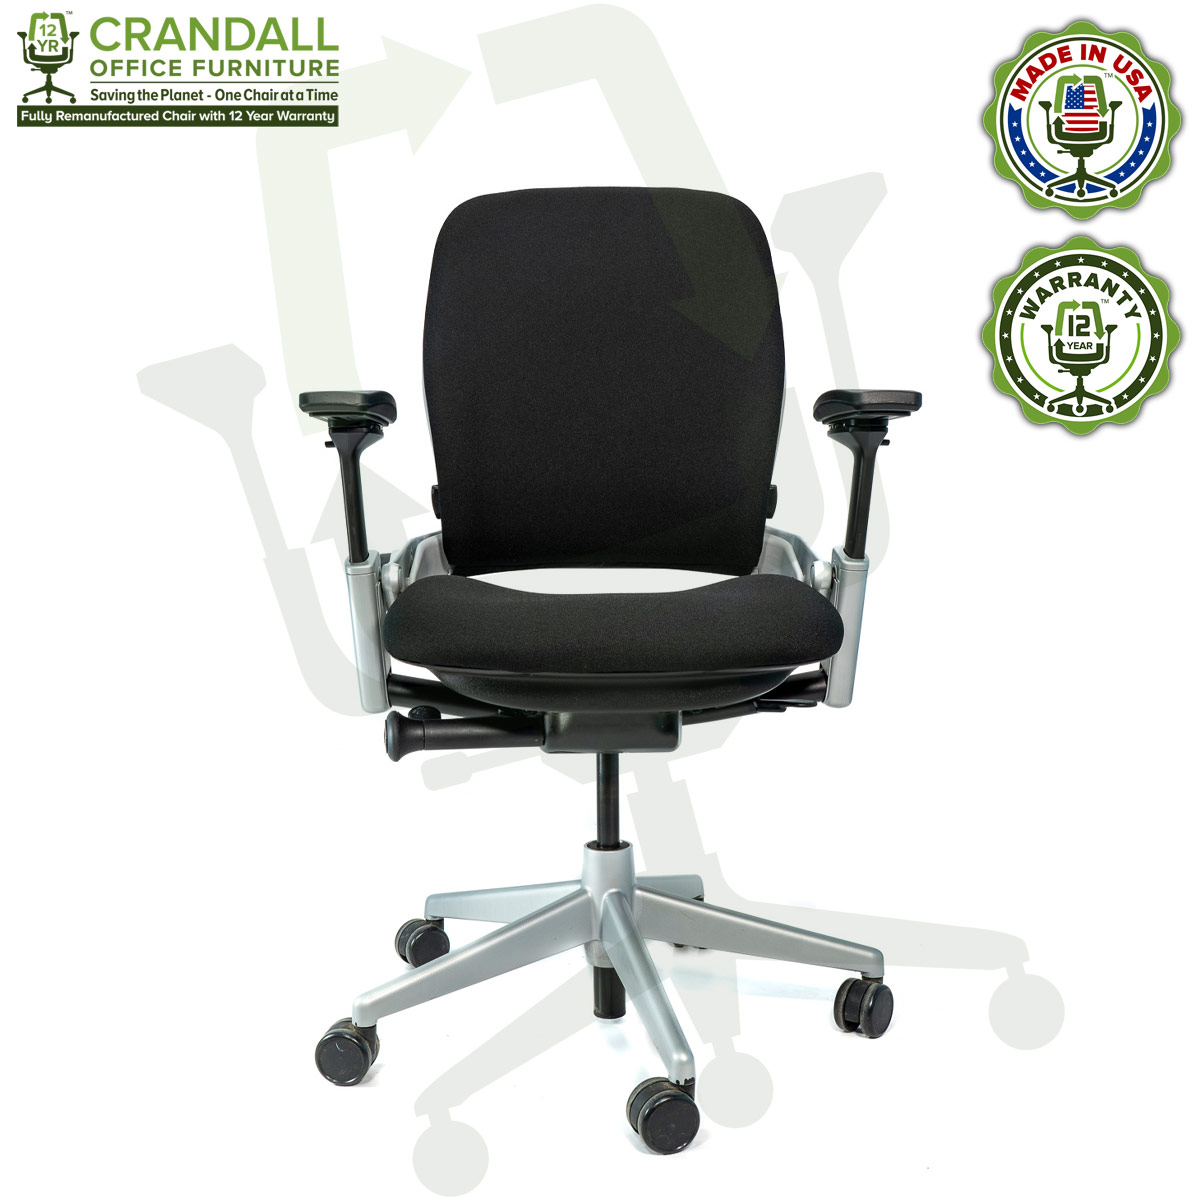 Crandall Office Furniture Remanufactured Steelcase V2 Leap Chair - Platinum Frame 01